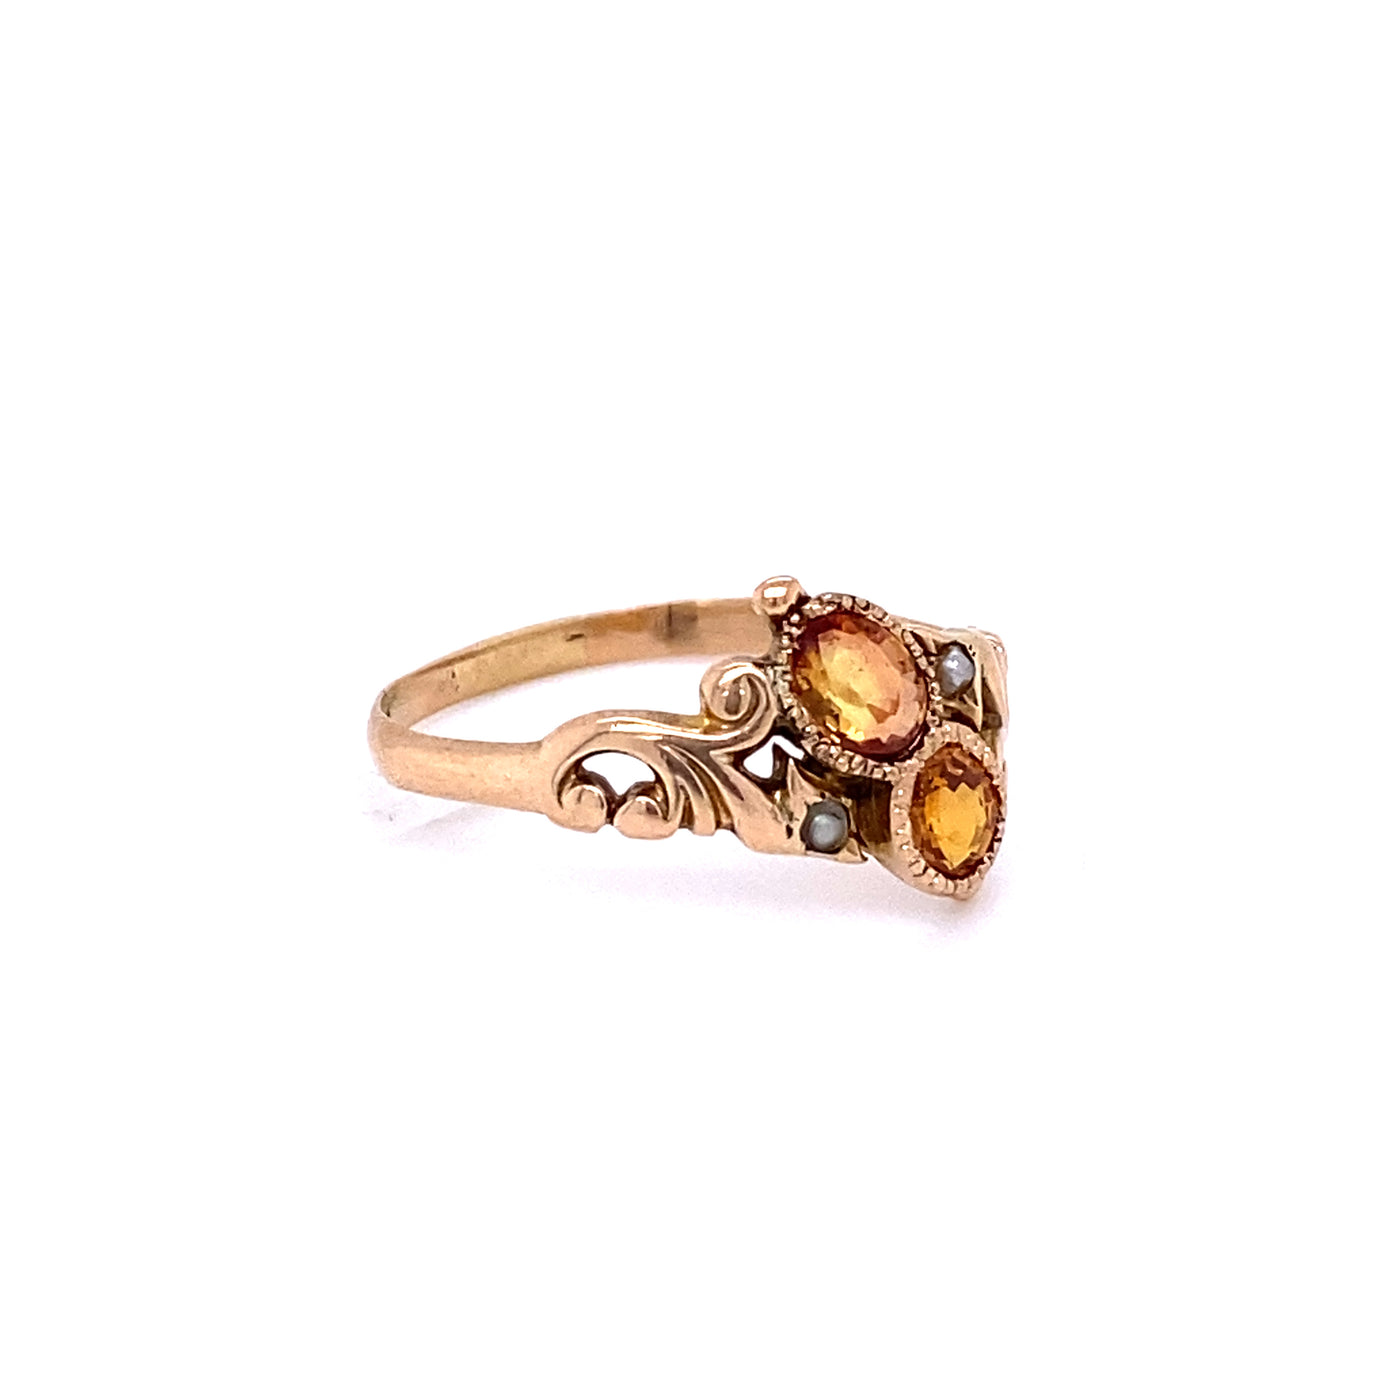 Victorian Yellow Sapphire & Pearl Ring